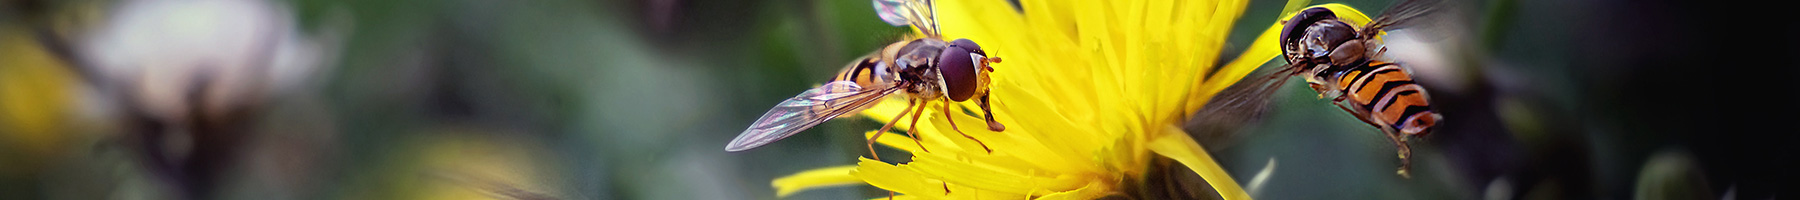 hoverflies and yellow flowers